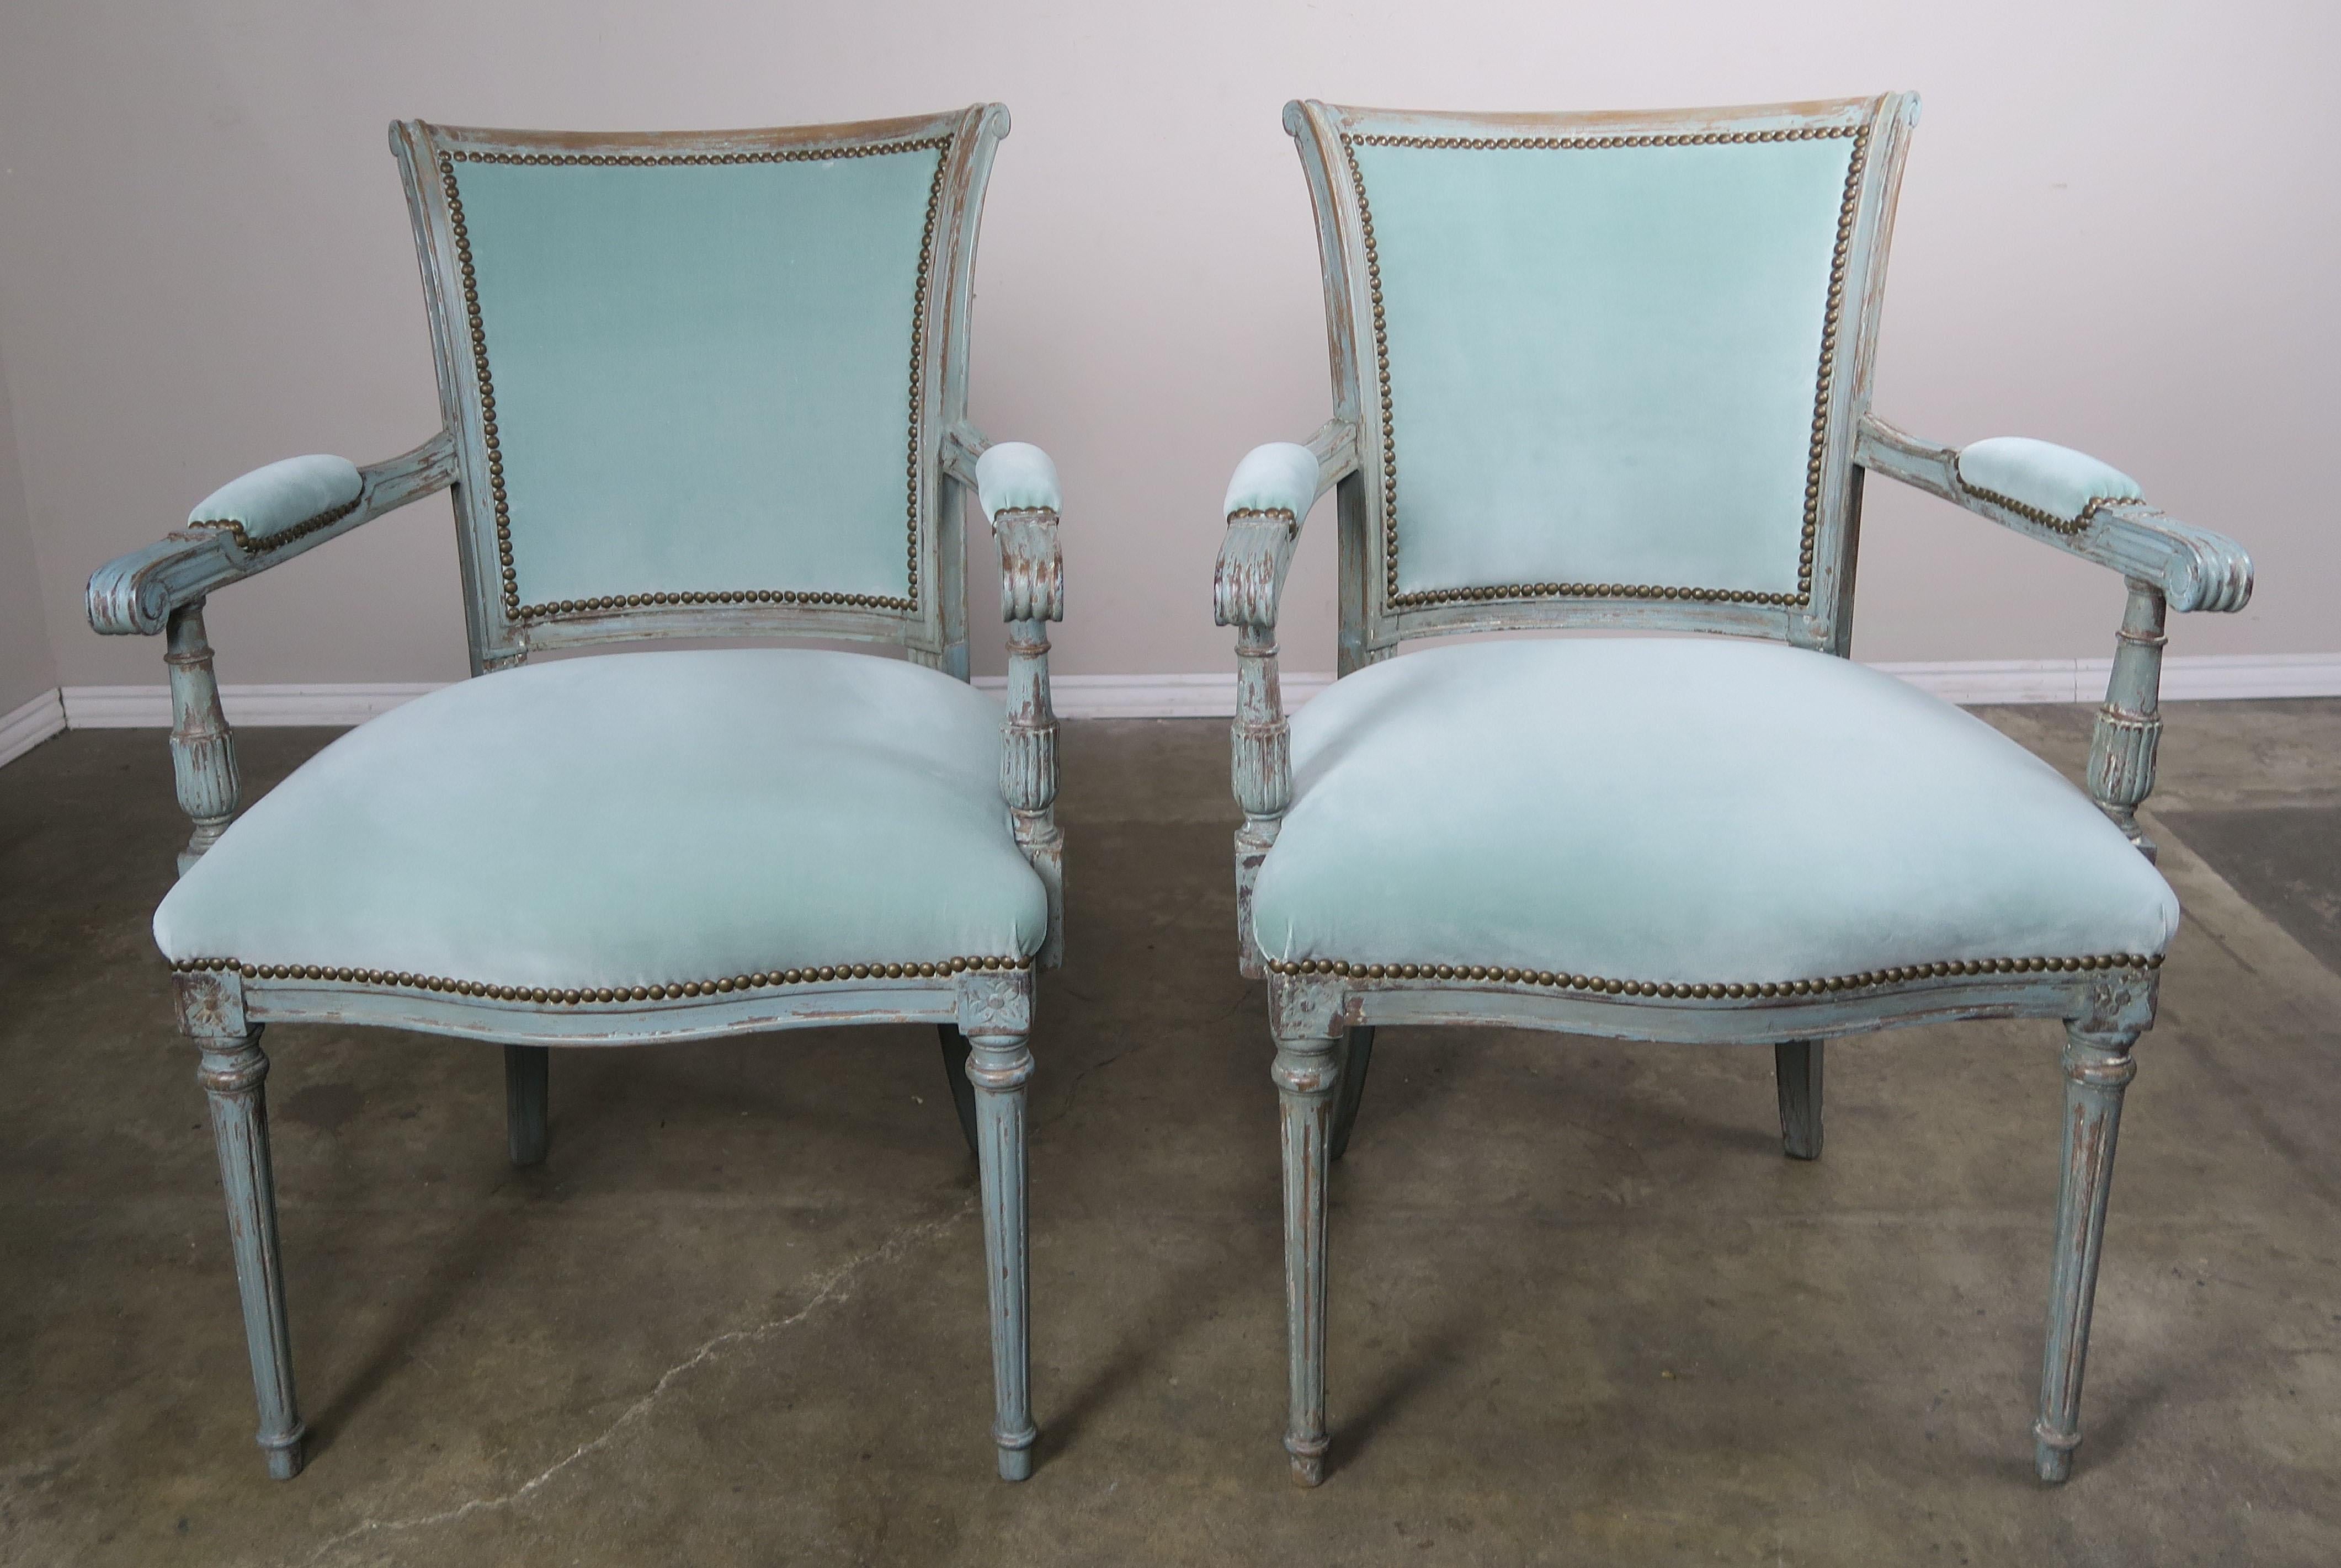 Set of eight painted Louis XVI style dining chairs newly upholstered in soft robin's egg blue velvet with antique brass nailhead trim detail. Each dining chair stands on four fluted straight legs and the chairs have elegant clean lines. The finish